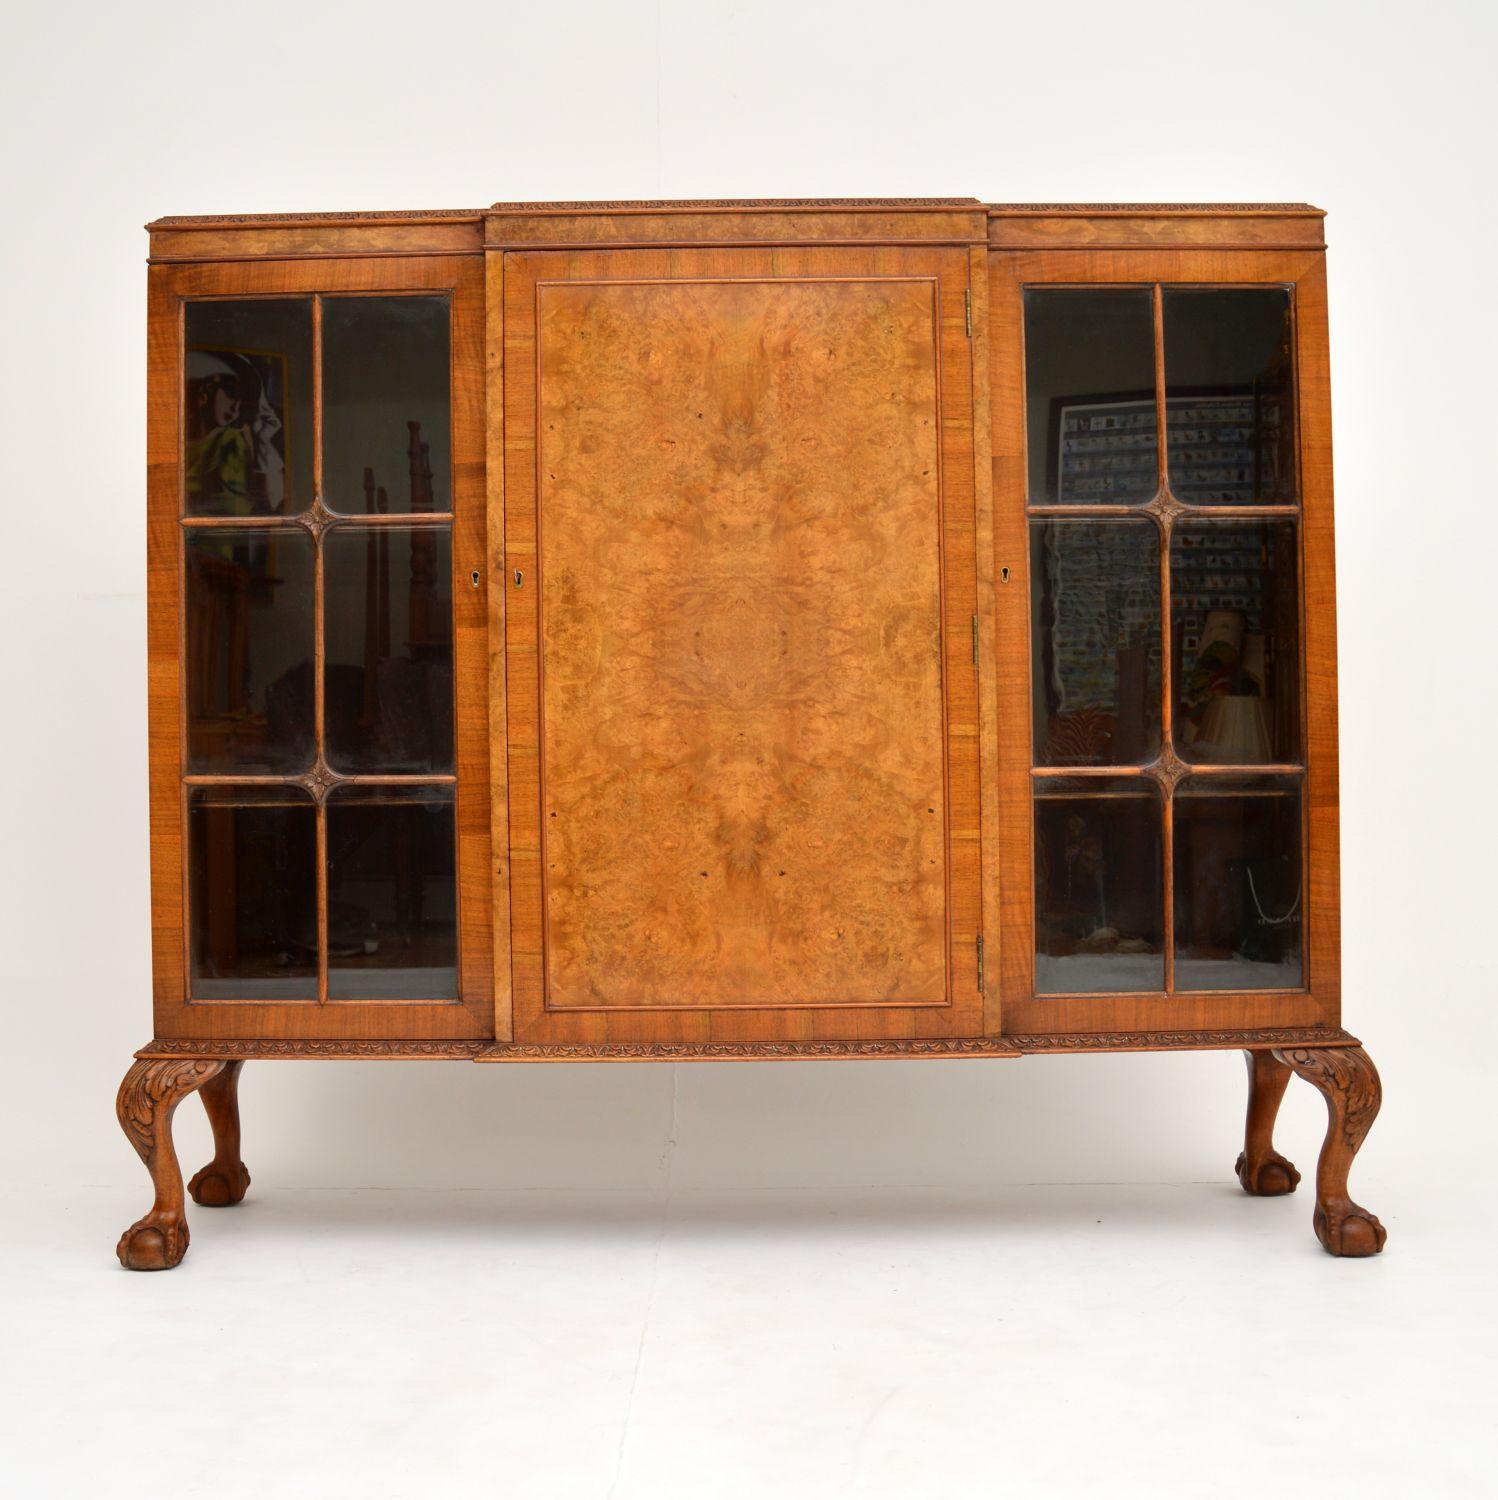 An excellent and fine quality antique bookcase, beautifully made from walnut. It is in the antique Queen Anne style, and dates from circa 1920s-1930s.

This is a nice size and offers lots of storage space in the three cabinet compartments, the